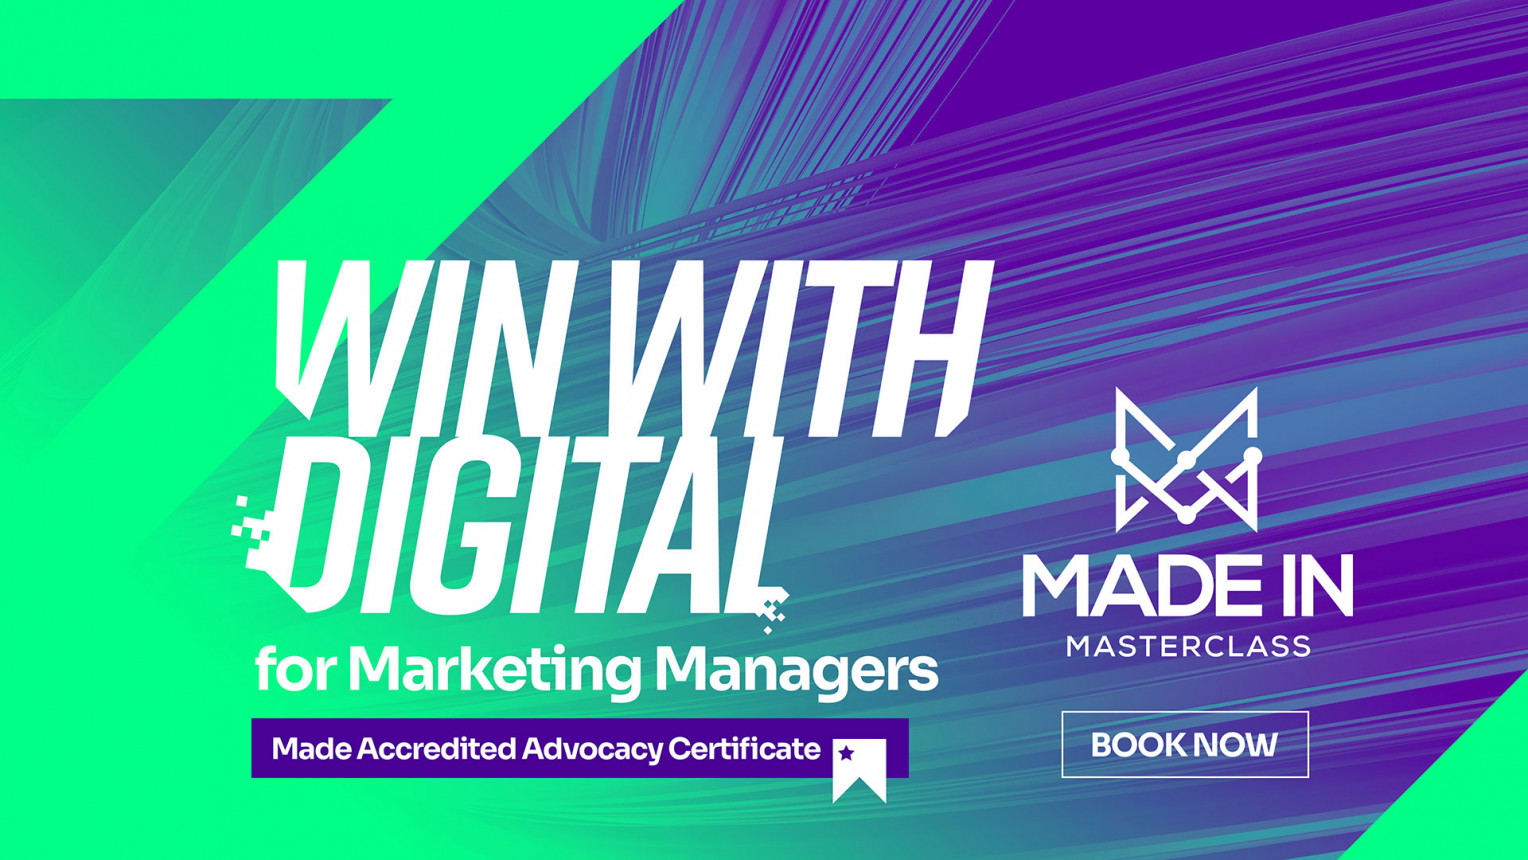 Win with Digital - For Marketing Managers